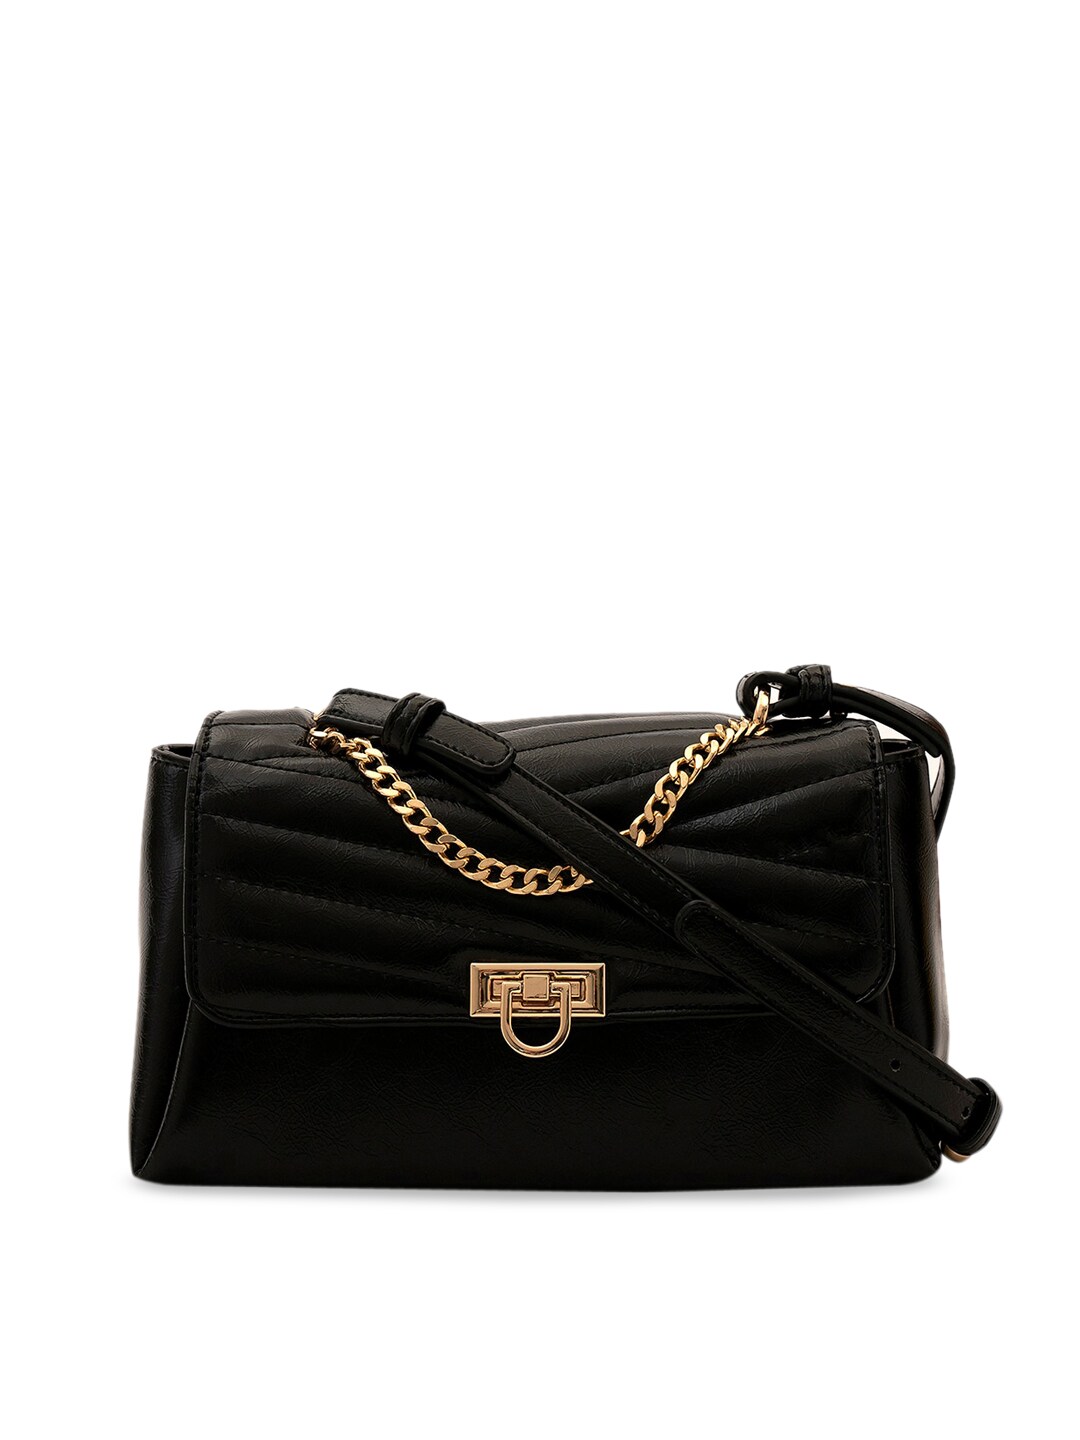 MIRAGGIO Black Textured Structured Sling Bag Price in India